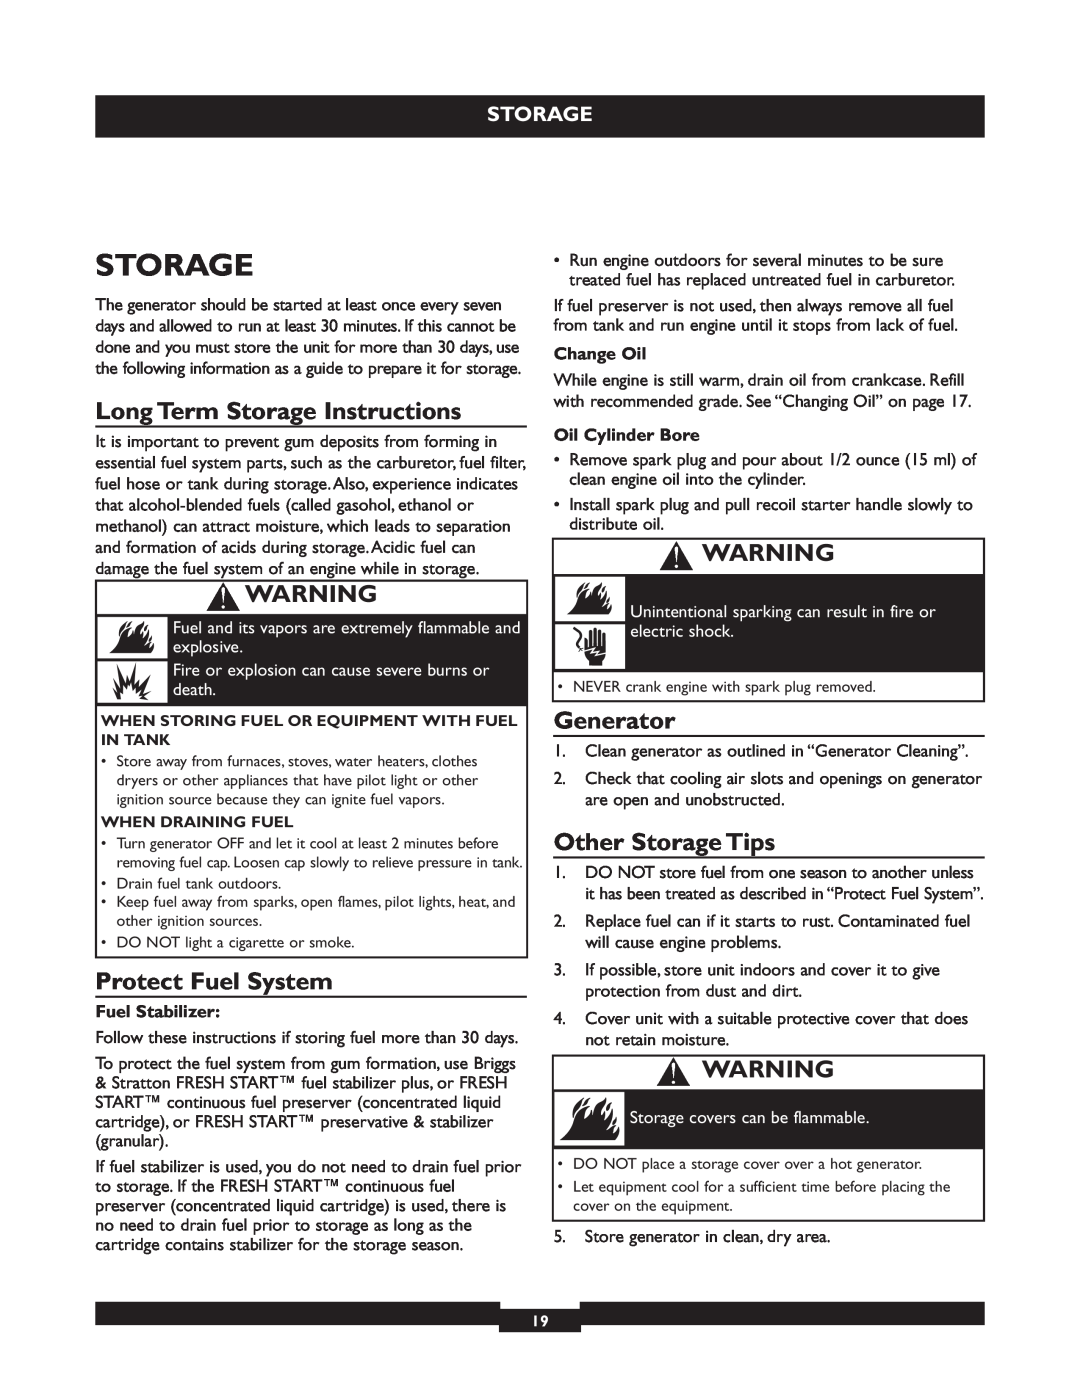 Briggs & Stratton 30236 Long Term Storage Instructions, Protect Fuel System, Generator, Other Storage Tips 